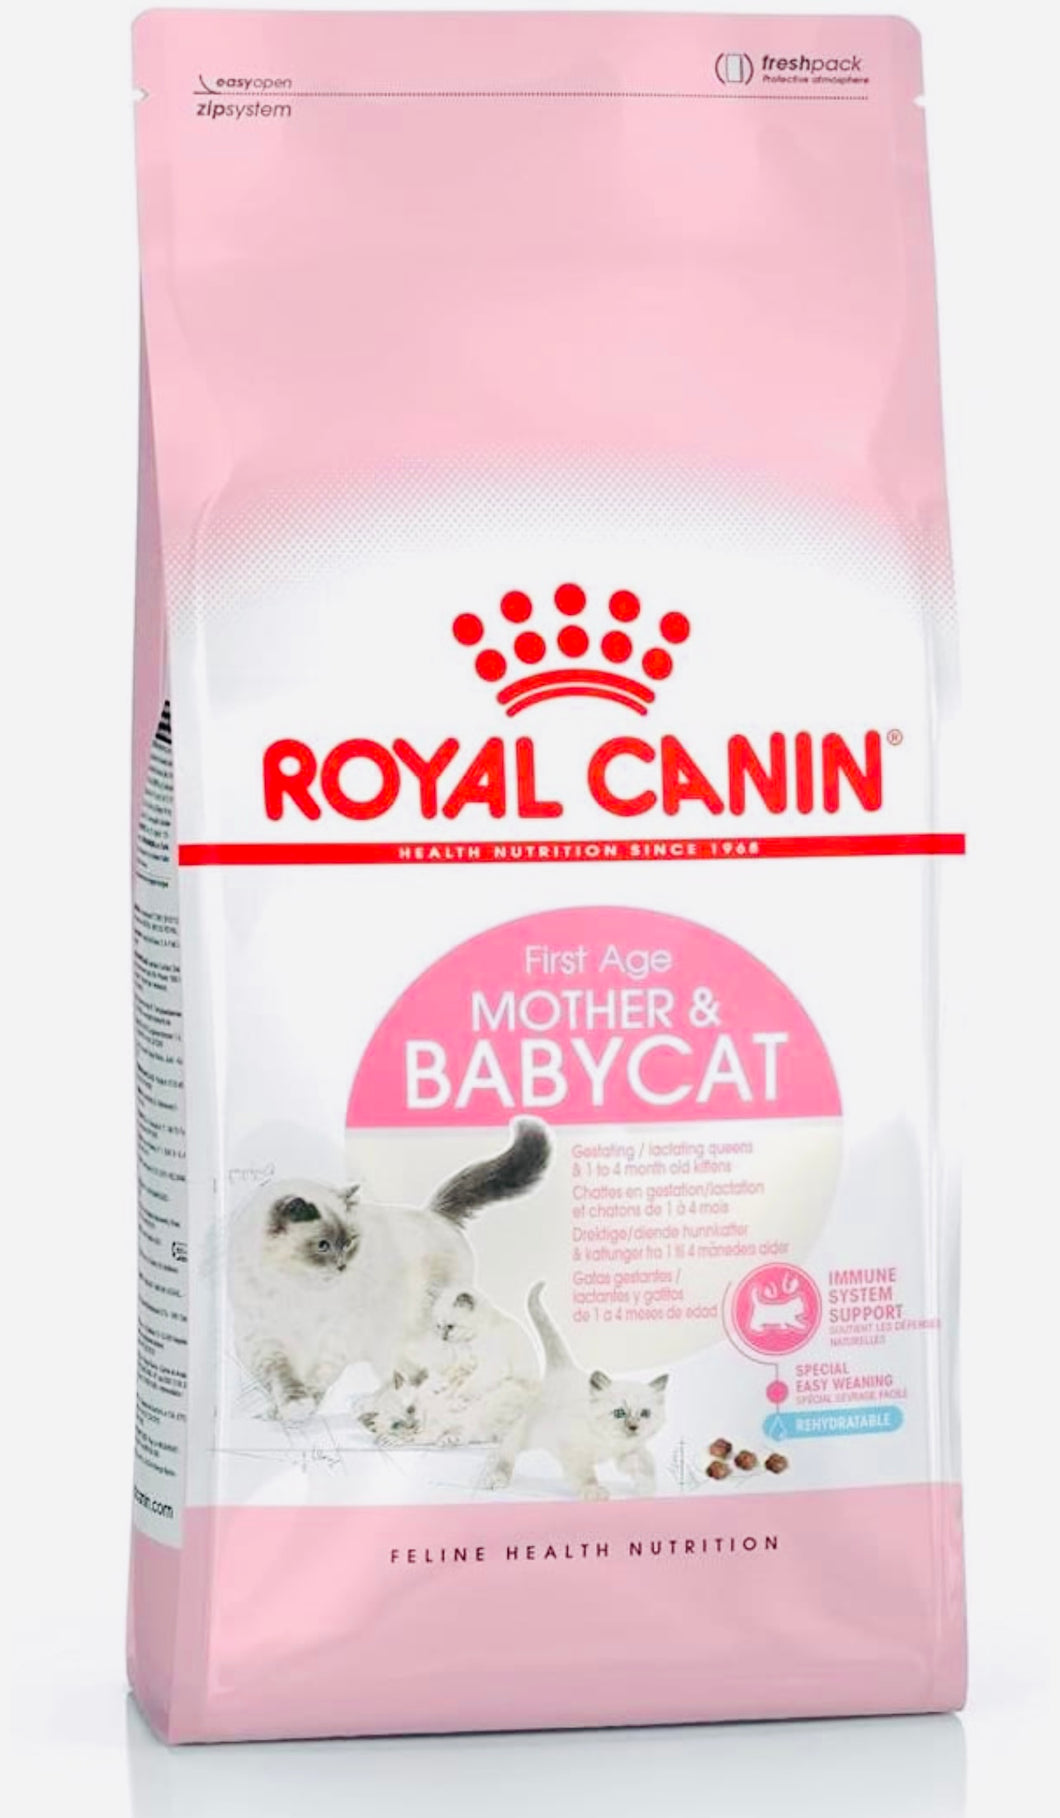 Royal Canin baby cat and mother dry dog food 2kg